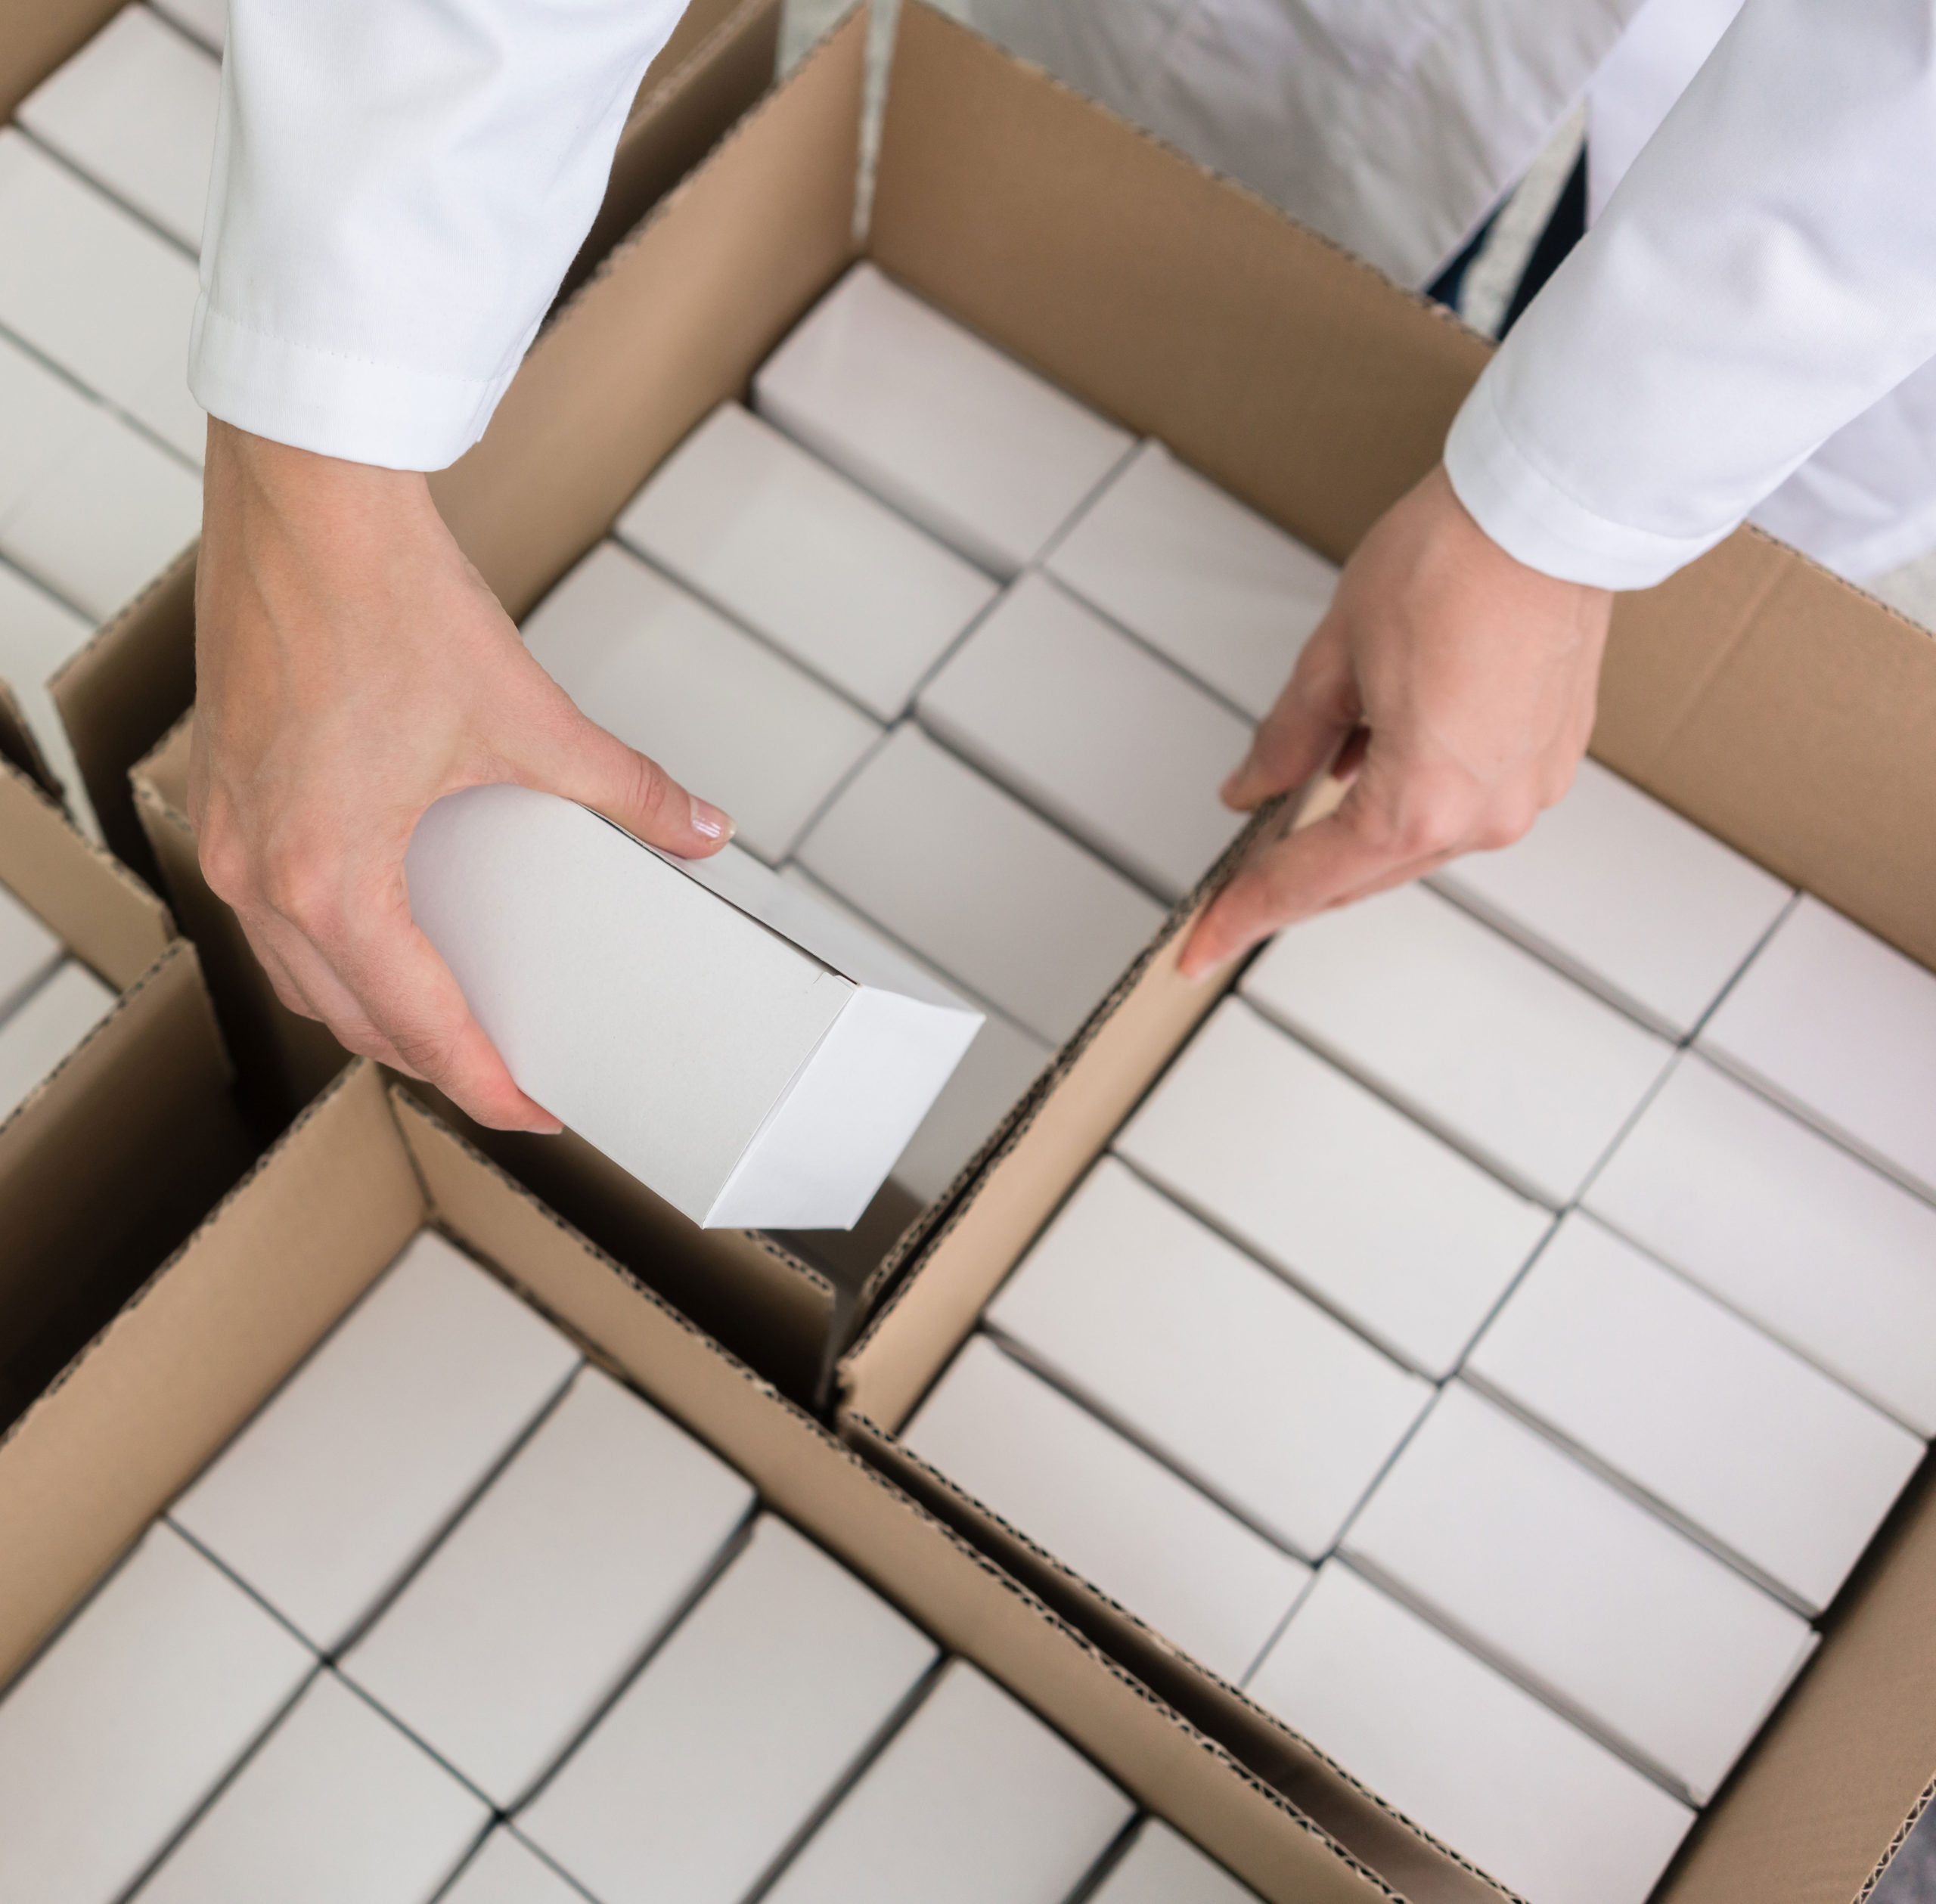 Order fulfillment packaging process